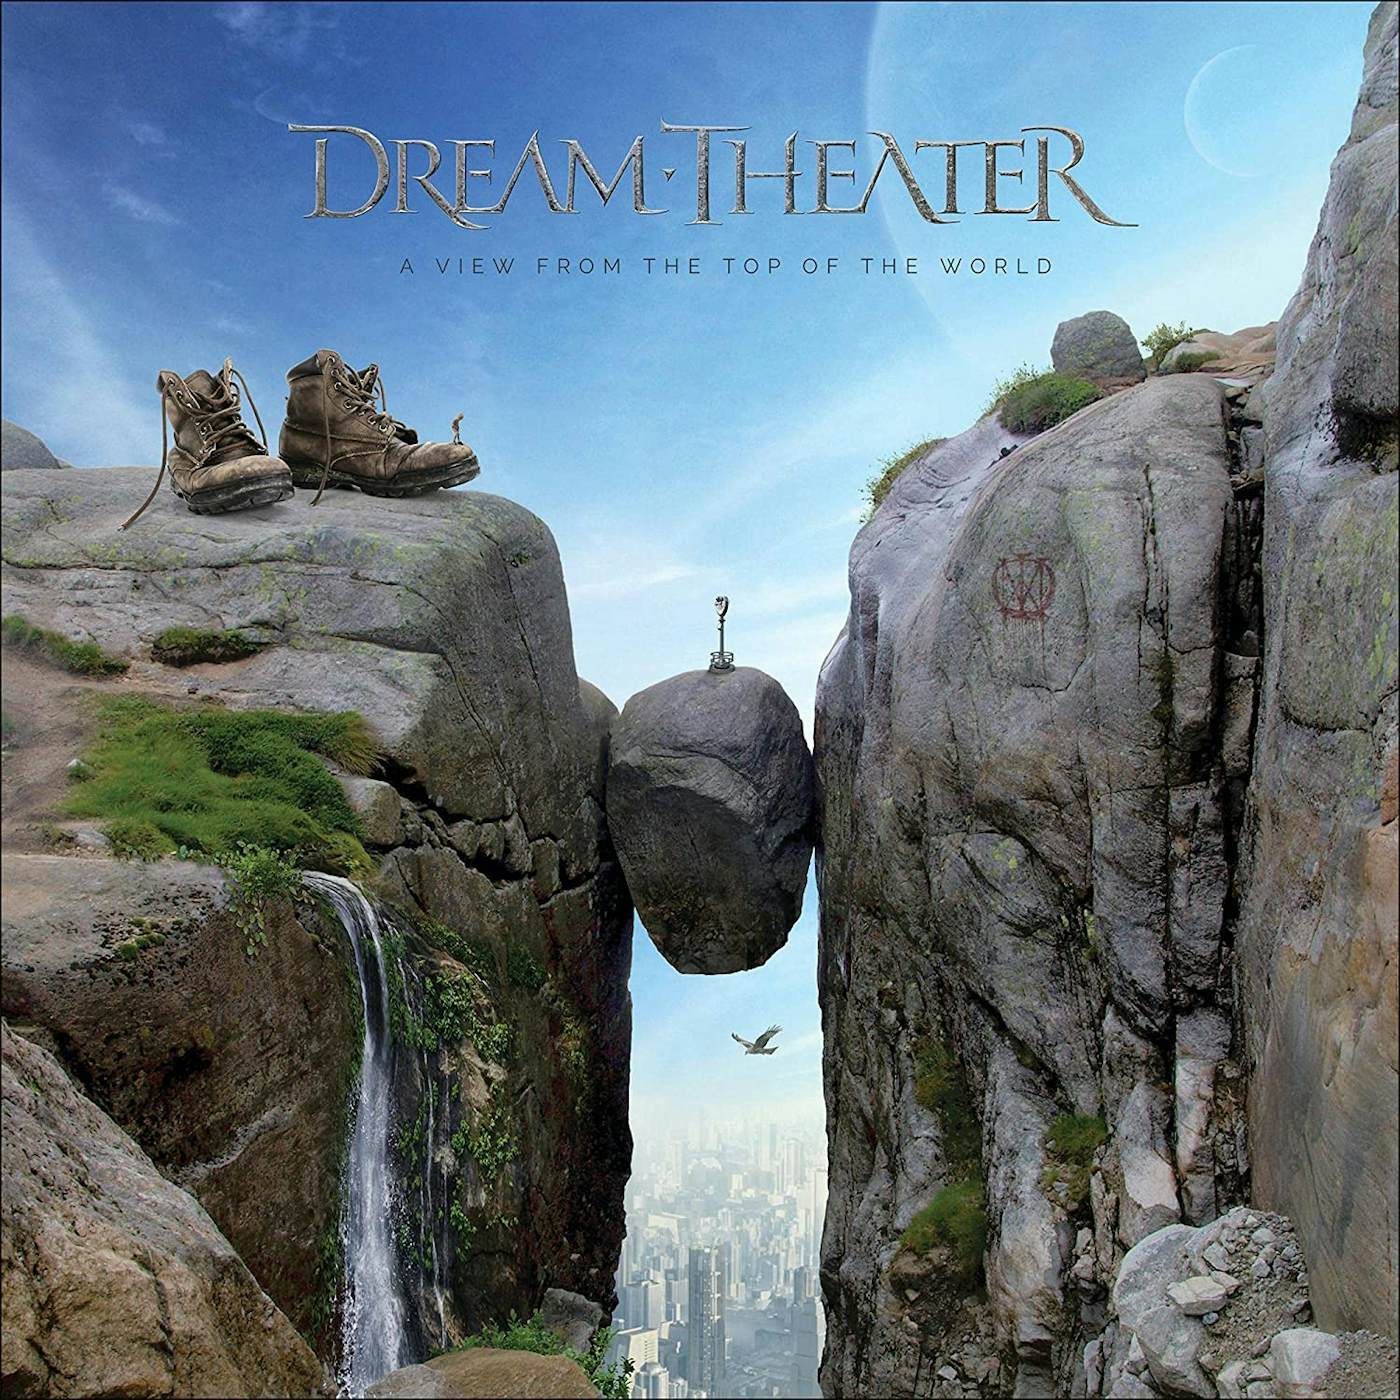 Dream Theater VIEW FROM THE TOP OF THE WORLD Vinyl Record